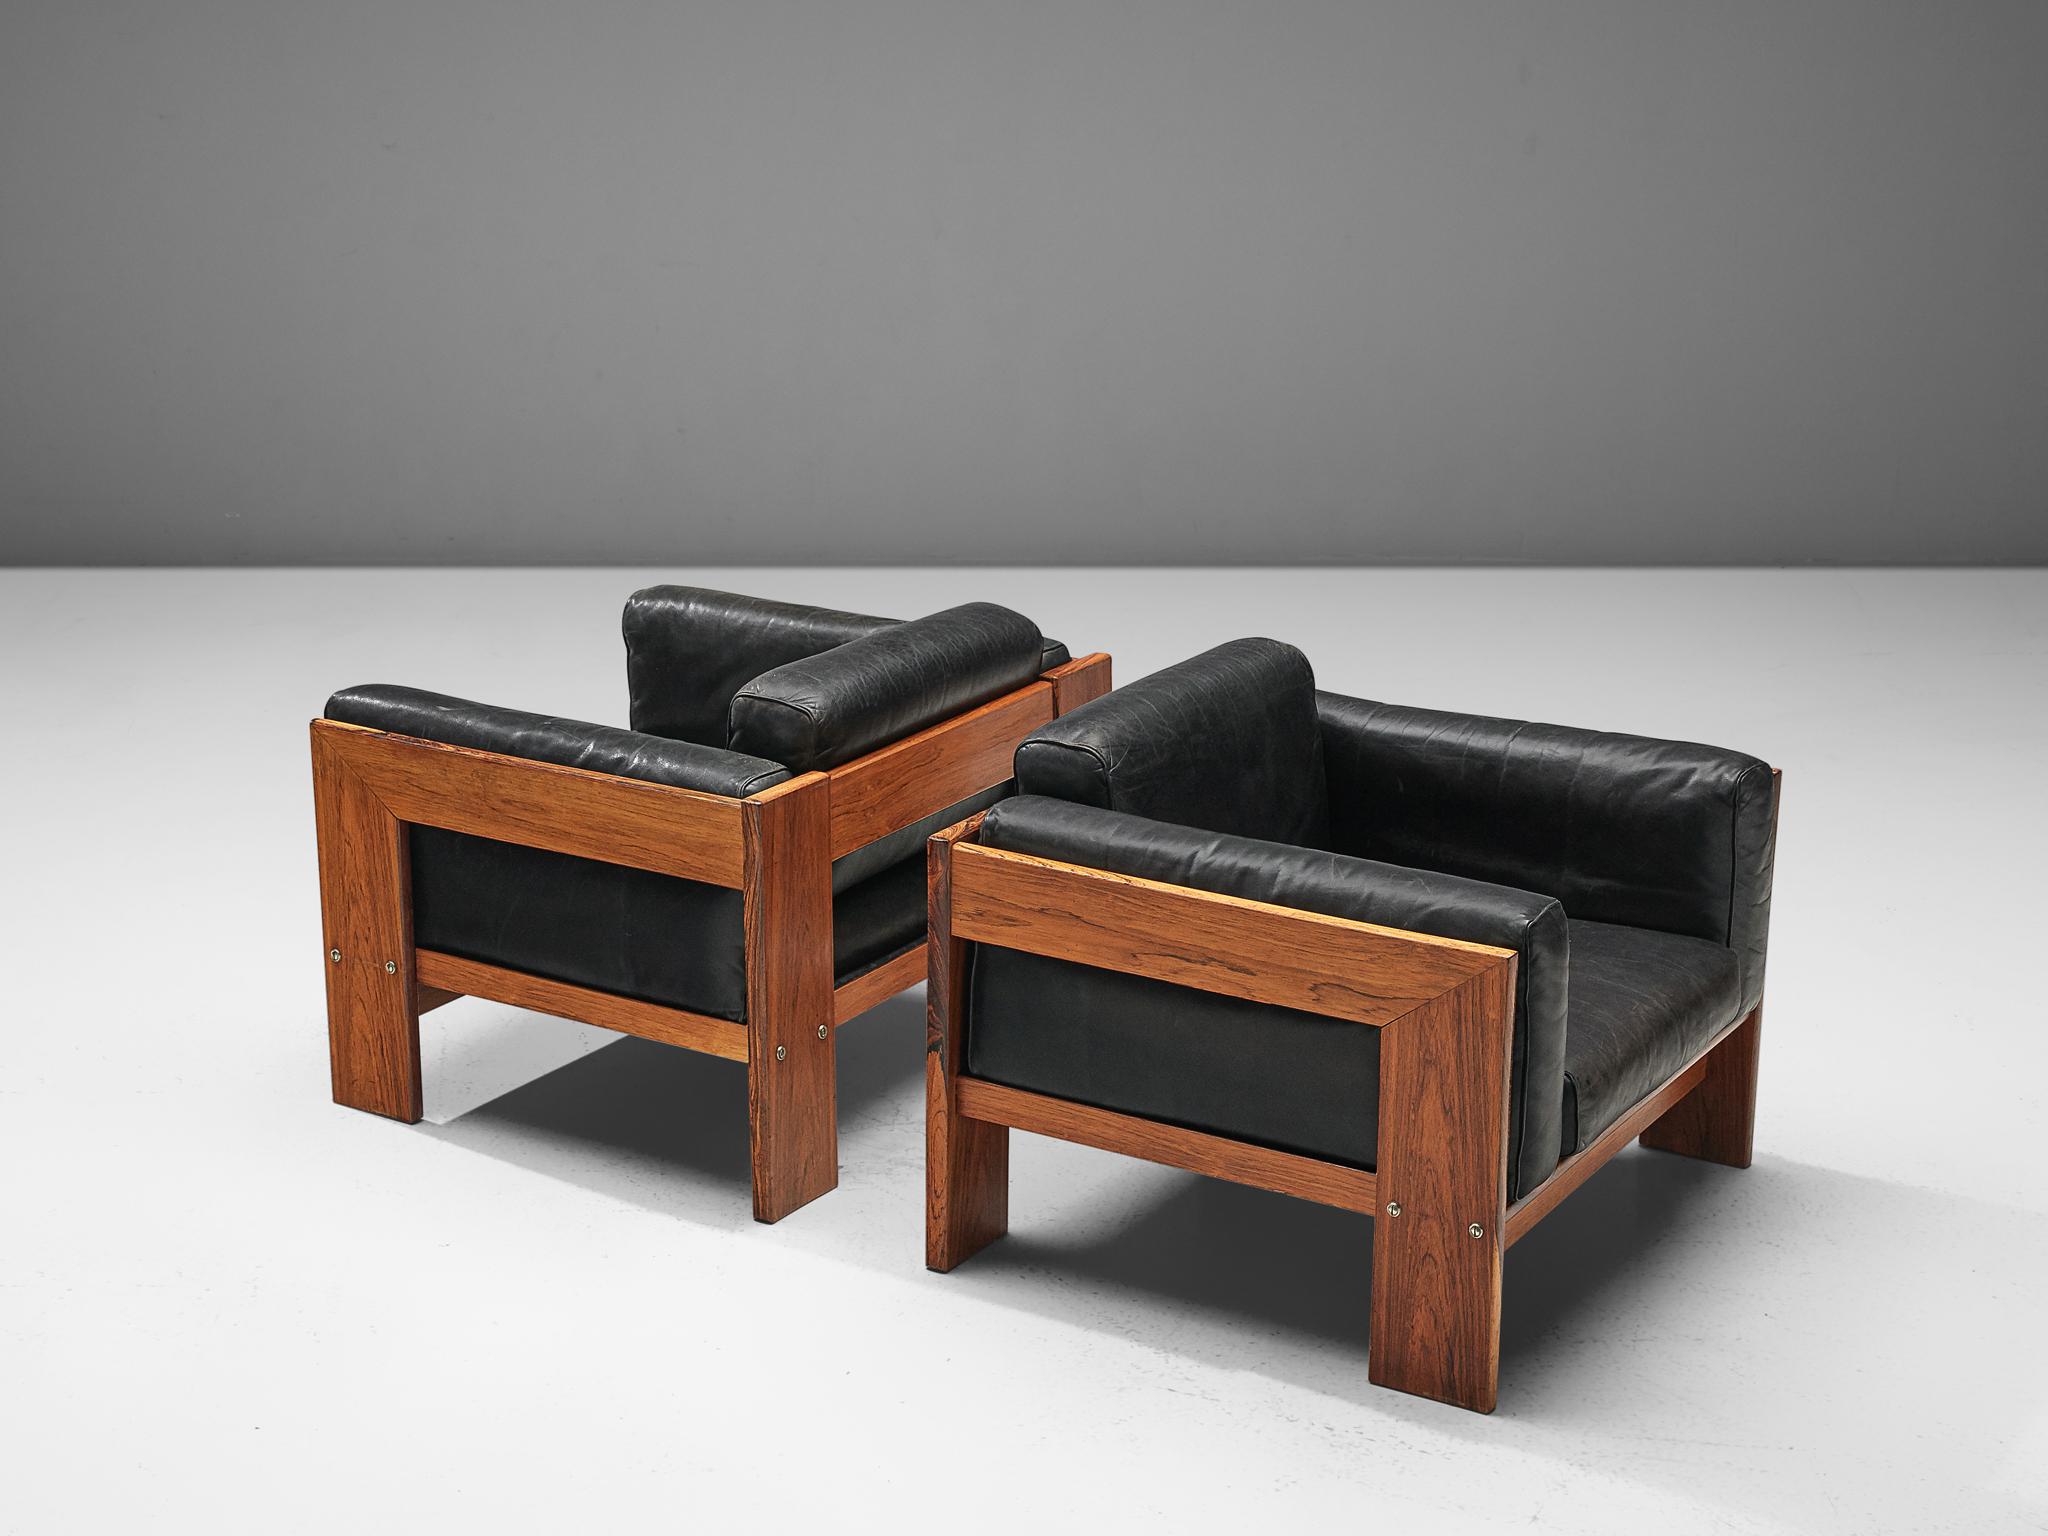 Tobia Scarpa for Knoll, pair of 'Bastiano' club chairs, leather and rosewood, Italy, design 1960, manufactured in 1970s.

Beautiful pair of Bastiano club chairs made with a rosewood frame and black leather cushions. Tobia Scarpa designed the